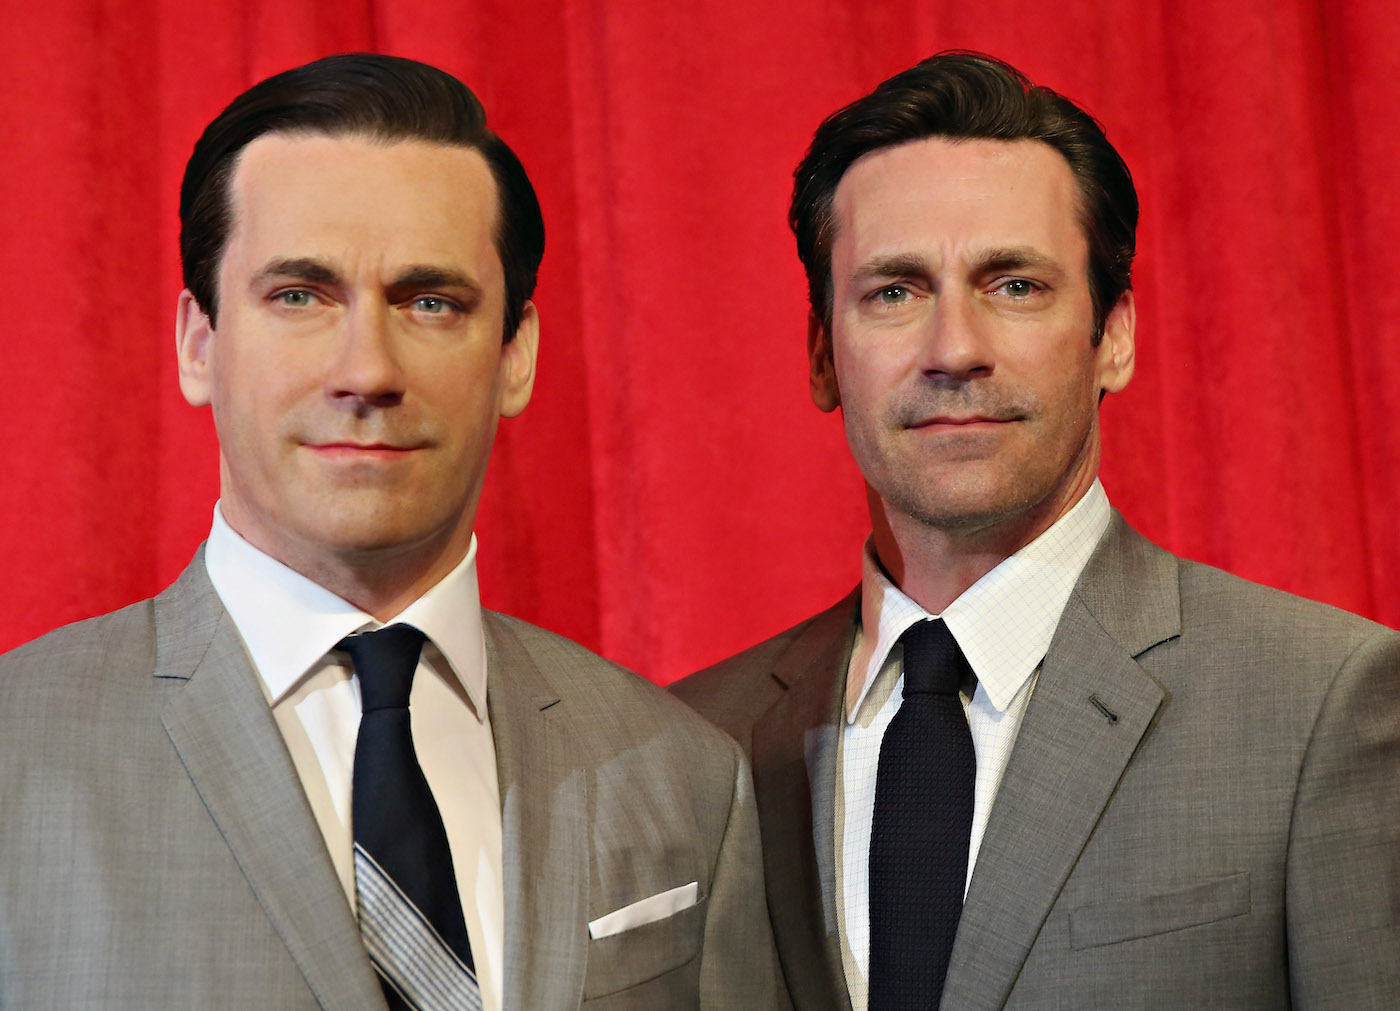 Actor Jon Hamm (right) stands next to his wax figure at Madame Tussauds in New City on May 9, 2014